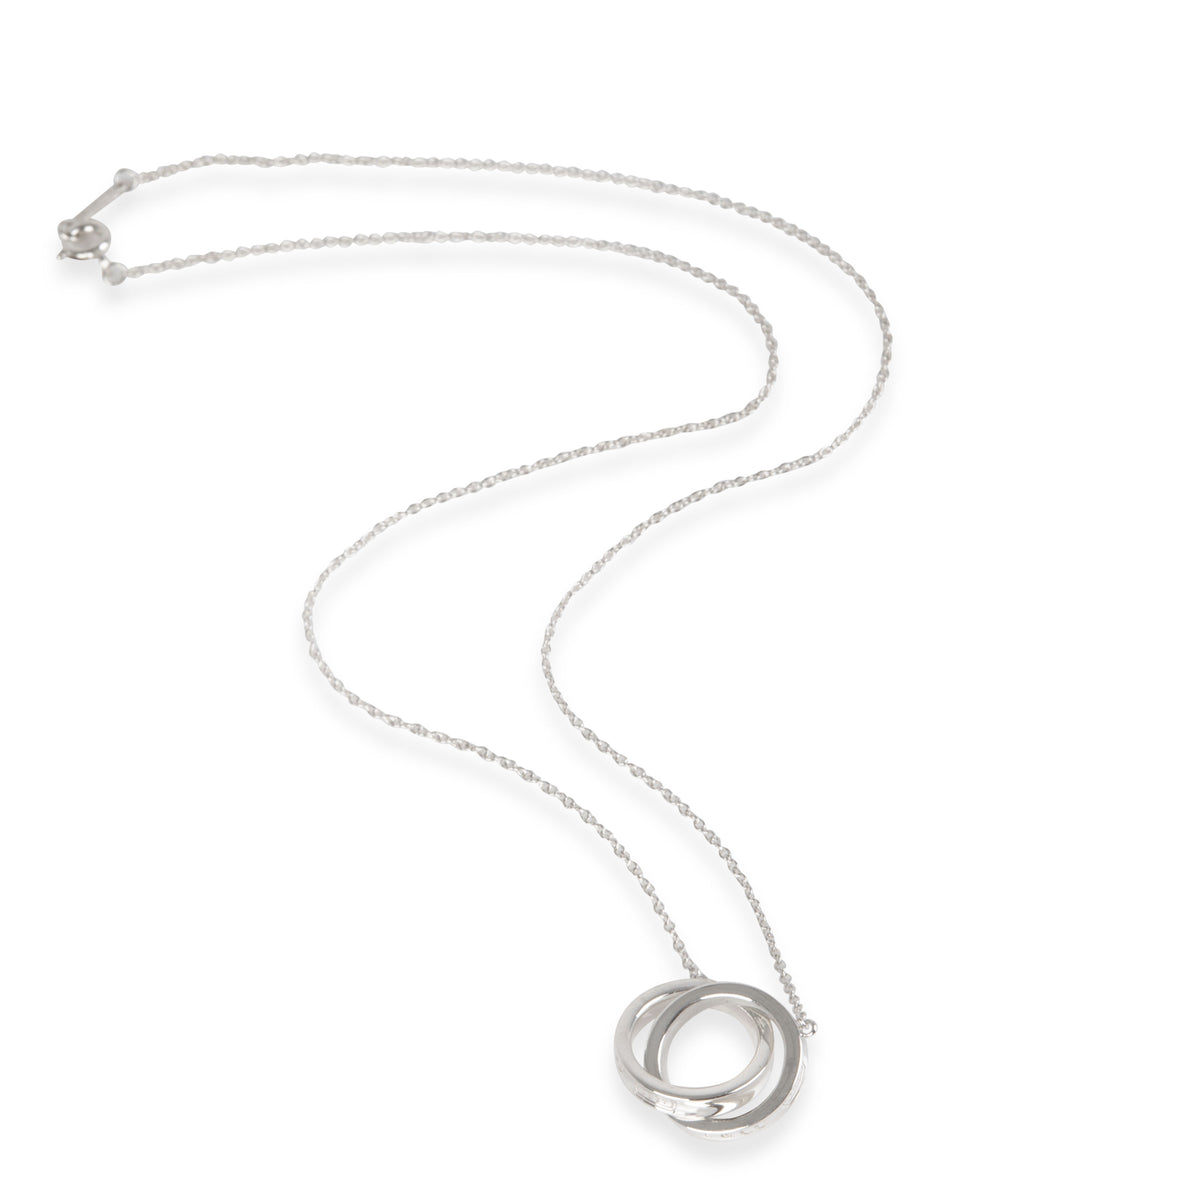 Tiffany & Co. 1837 Interlocking Circles  Necklace in  Sterling Silver